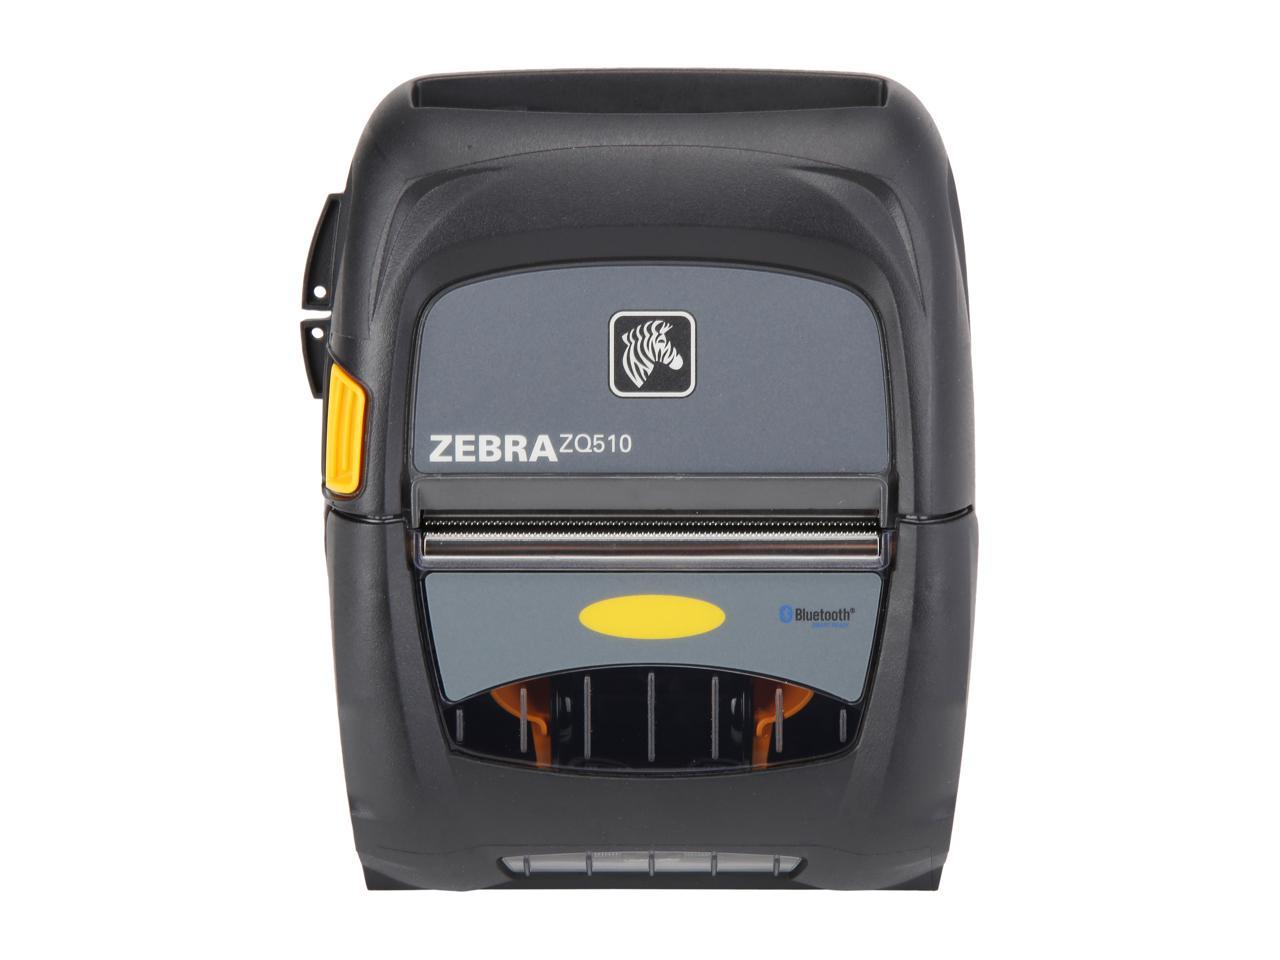 Zebra Zq510 3 Mobile Direct Thermal Receipt And Label Printer 203 Dpi Bluetooth 40 Linered 4123